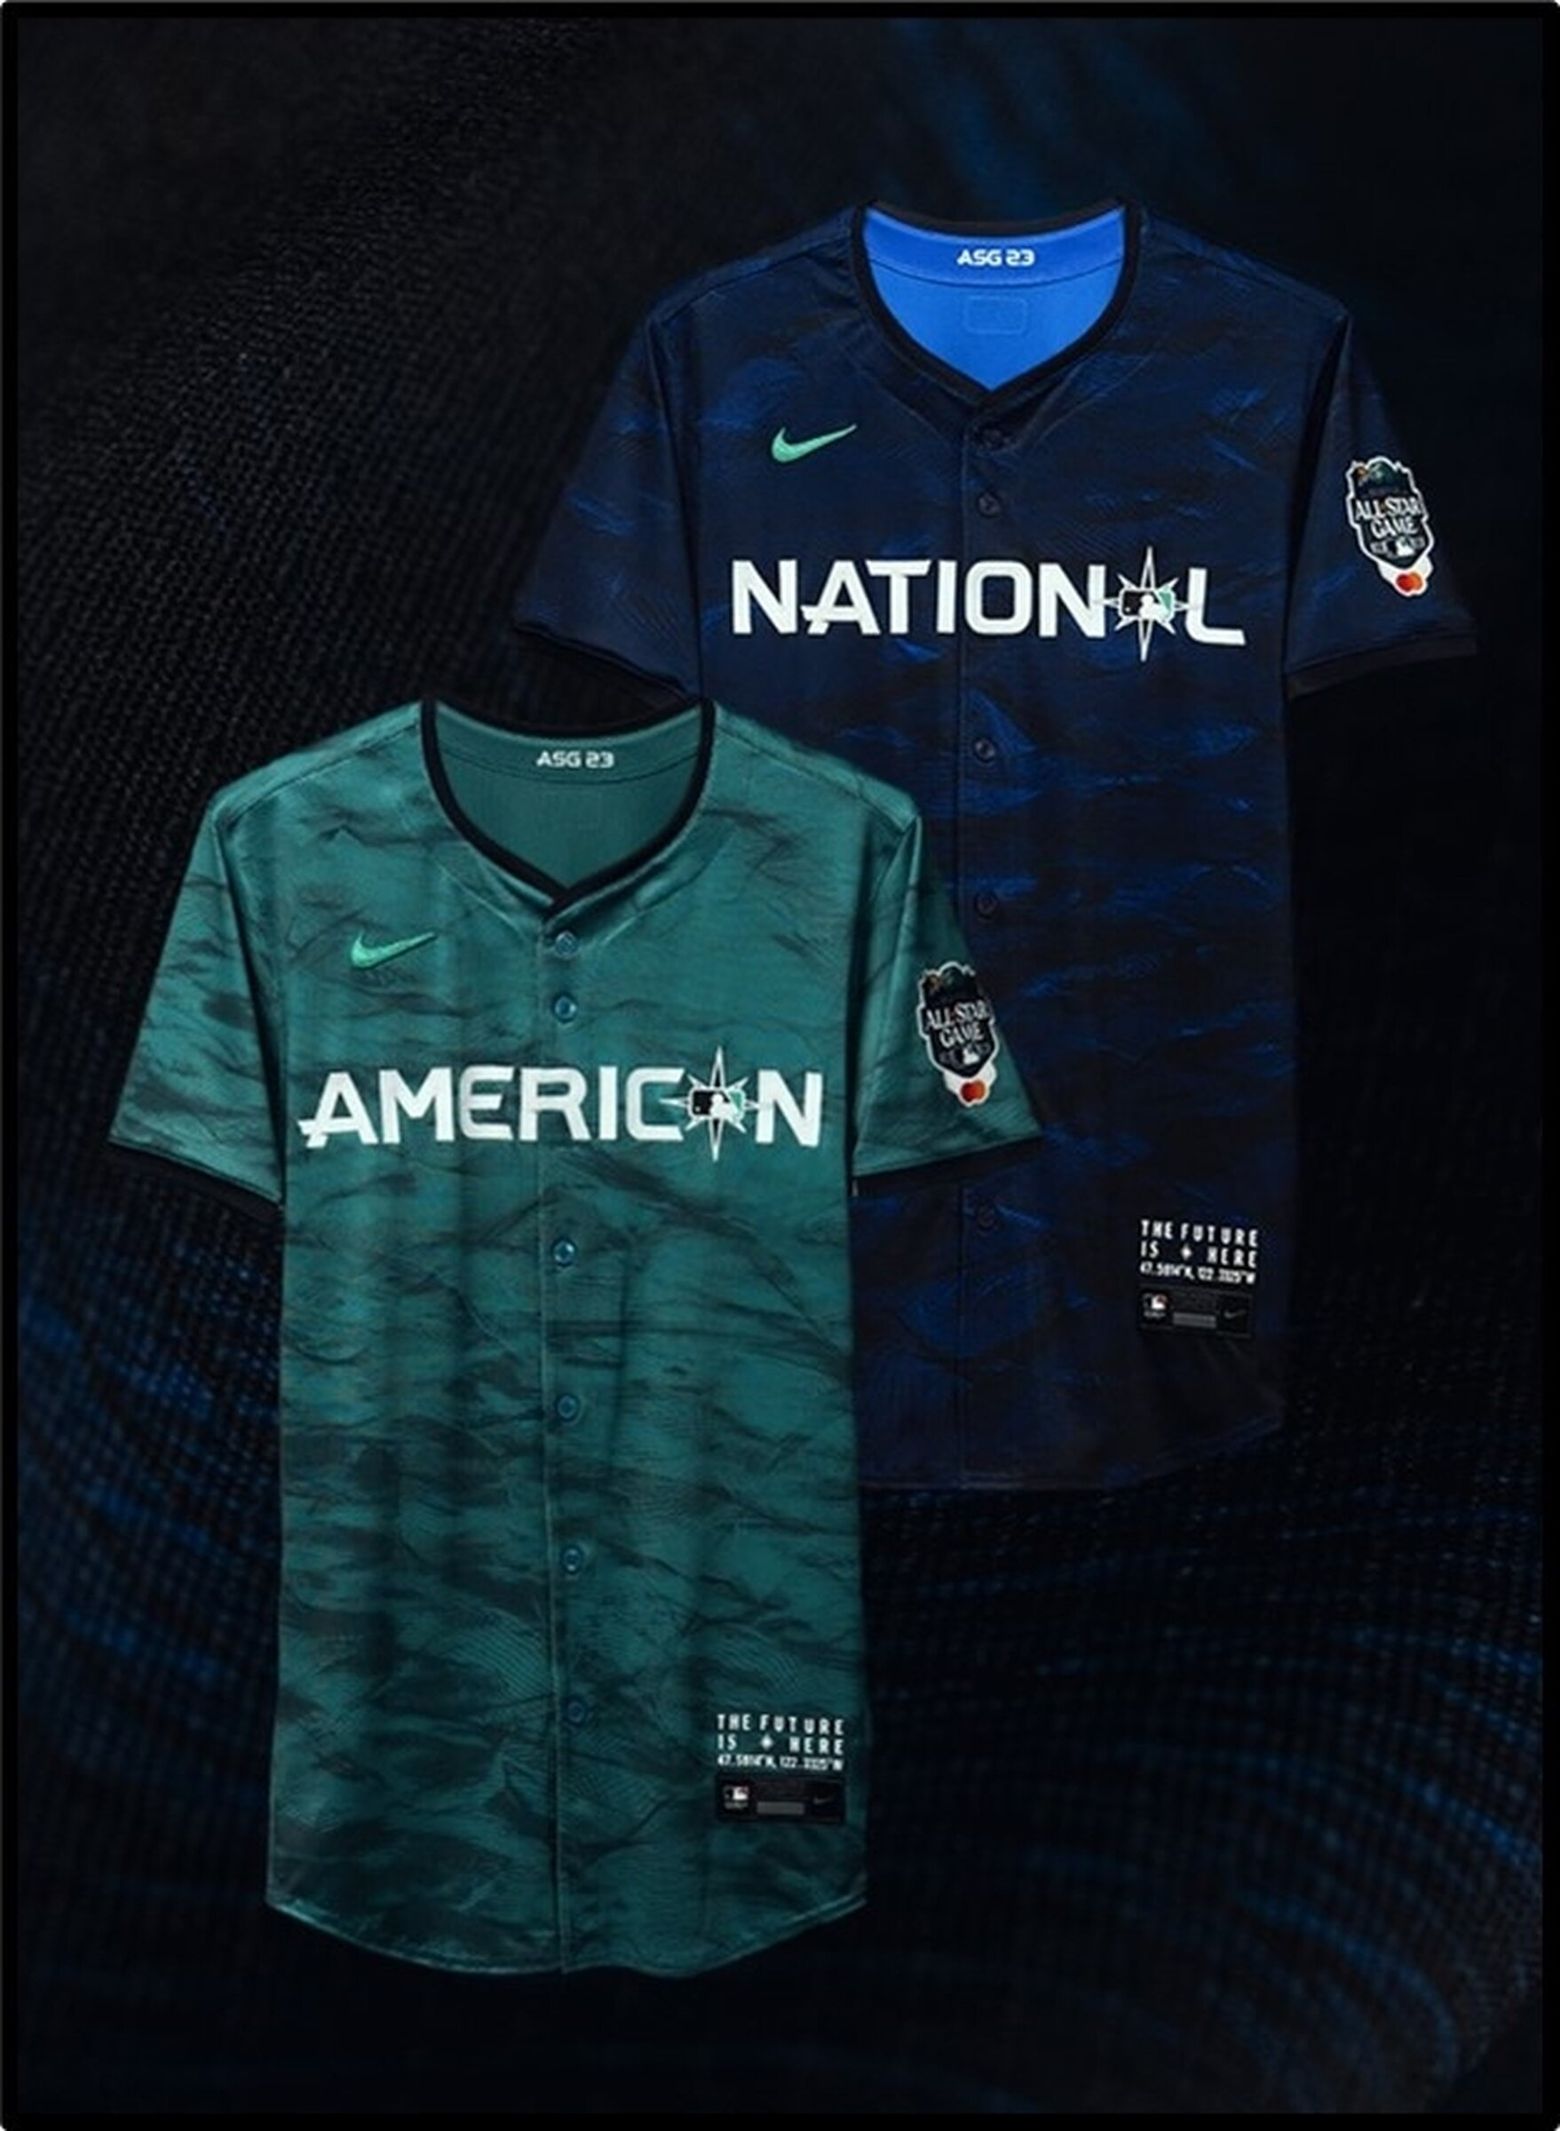 New Jersey's New Jerseys - All About The Jersey